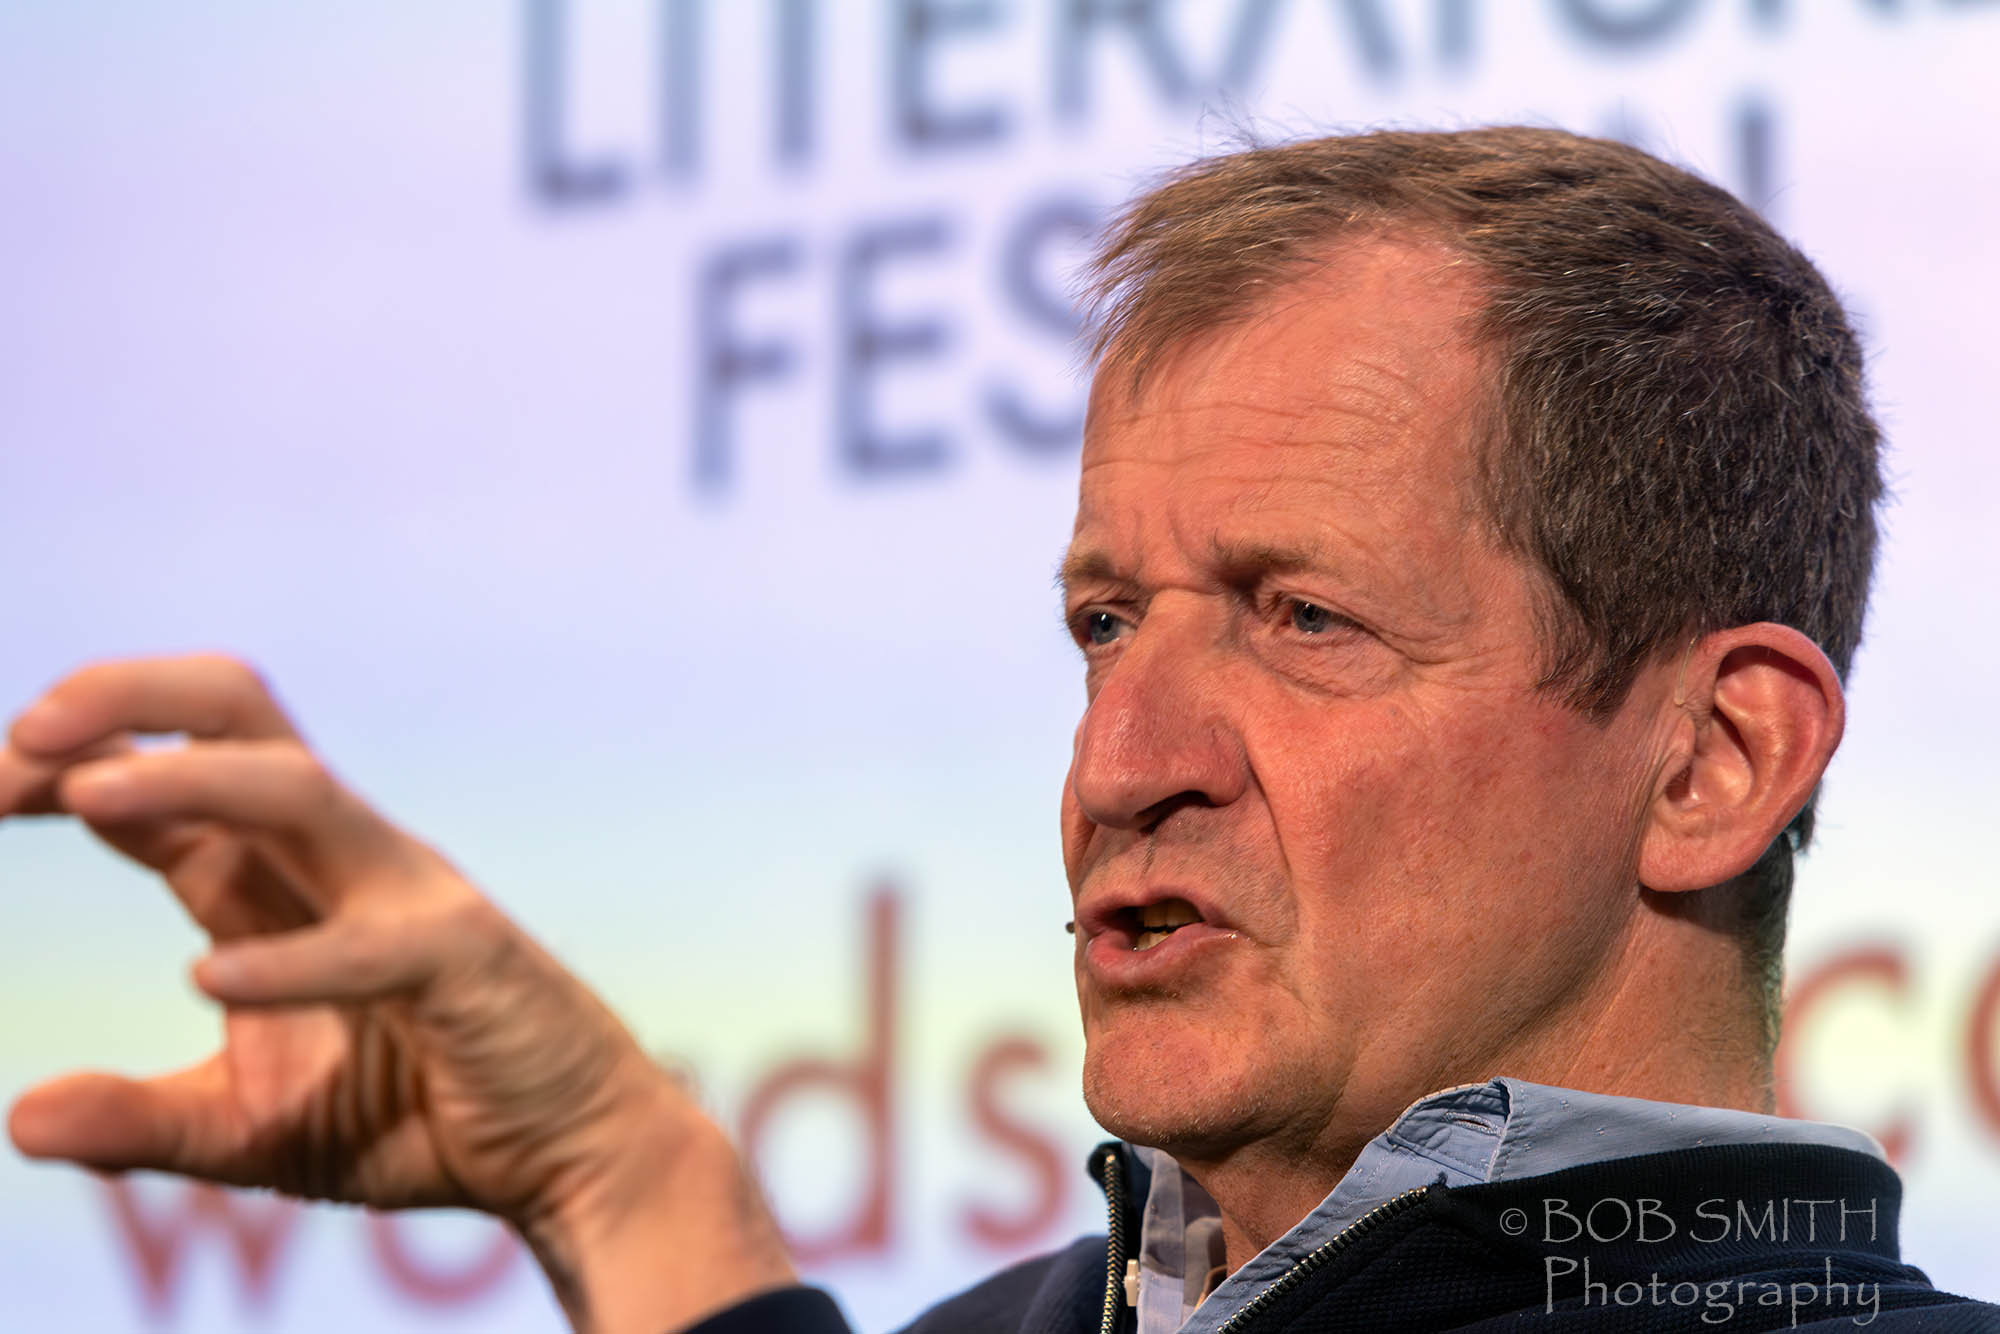 Former Labour spin doctor Alastair Campbell speaks at Bradford Literature Festival 2022